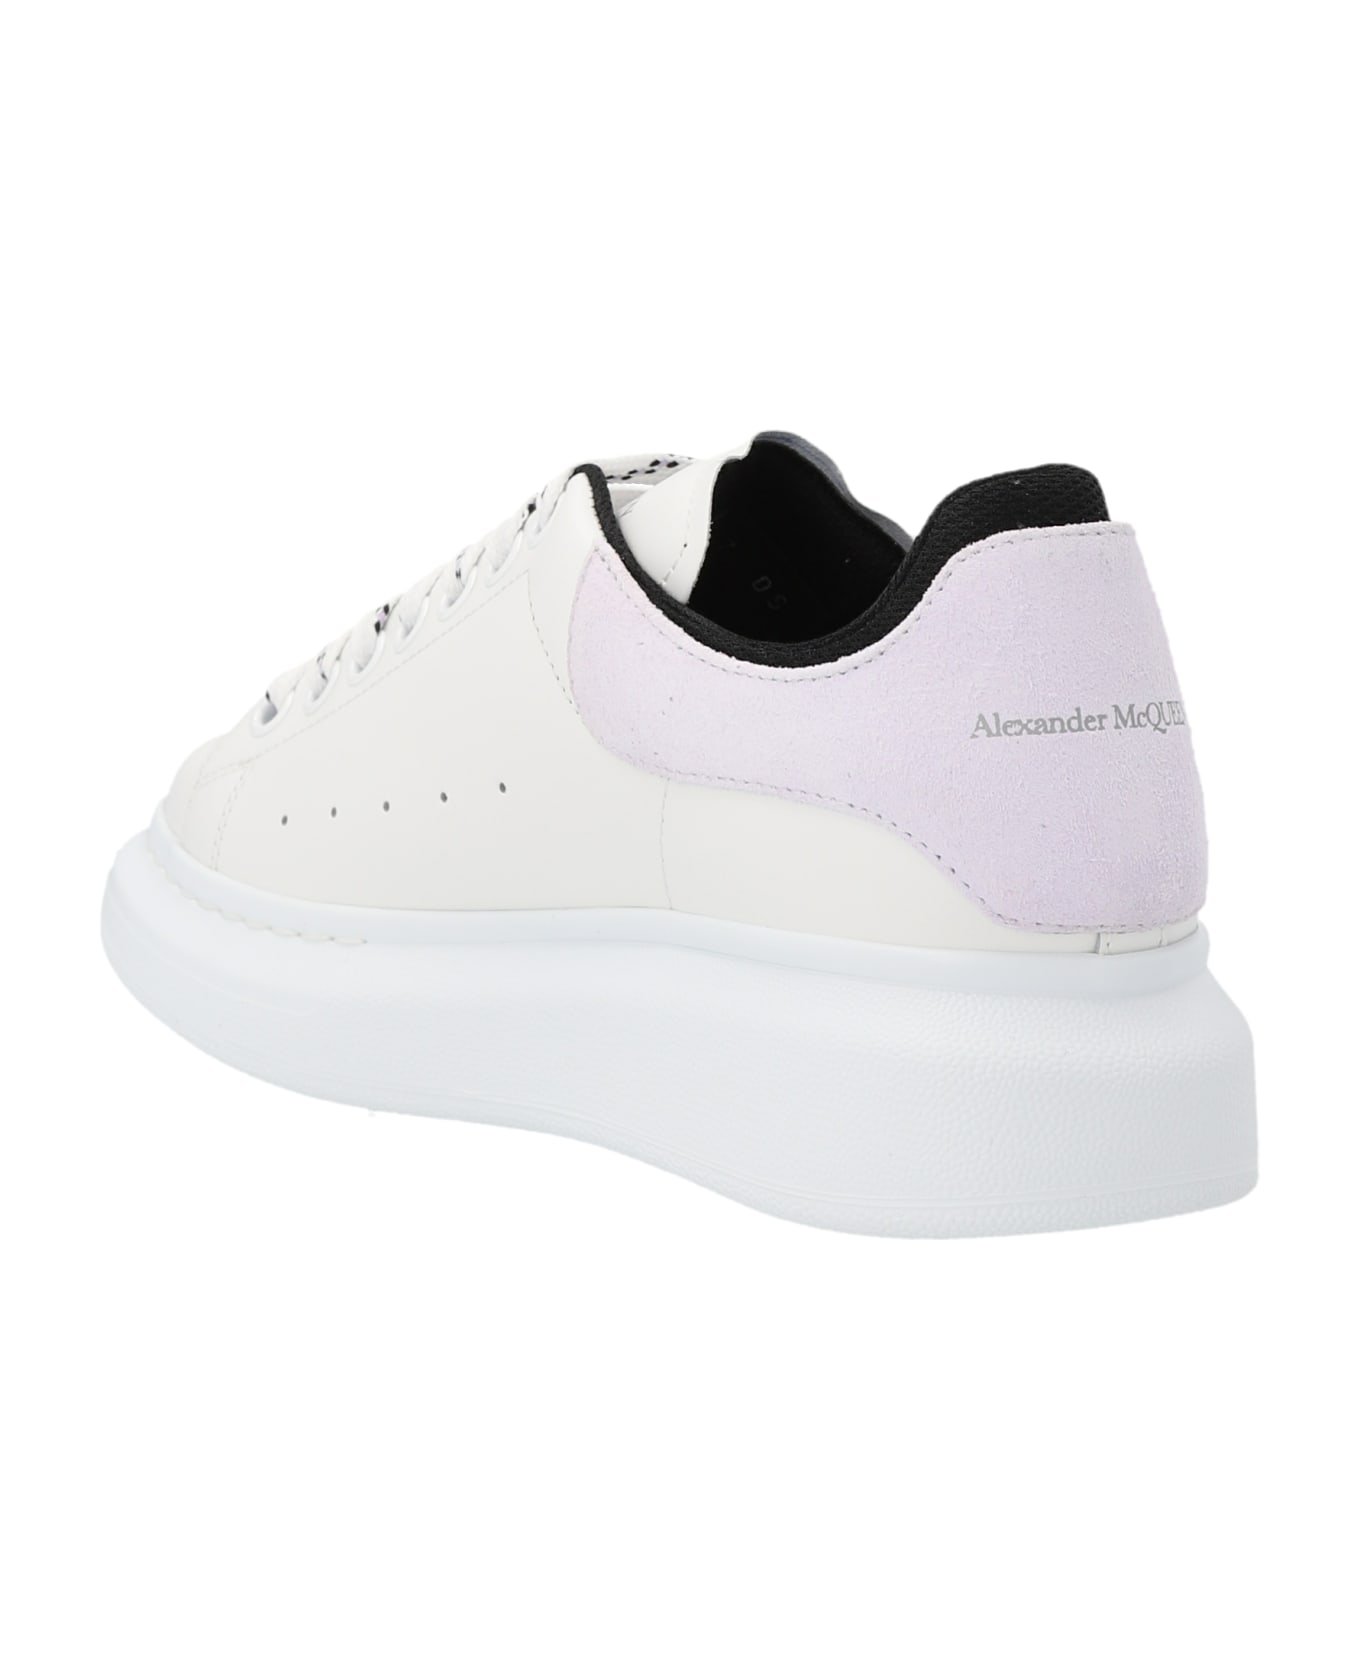 Alexander McQueen White, Black And Lilac Oversize Sneakers - Bianco